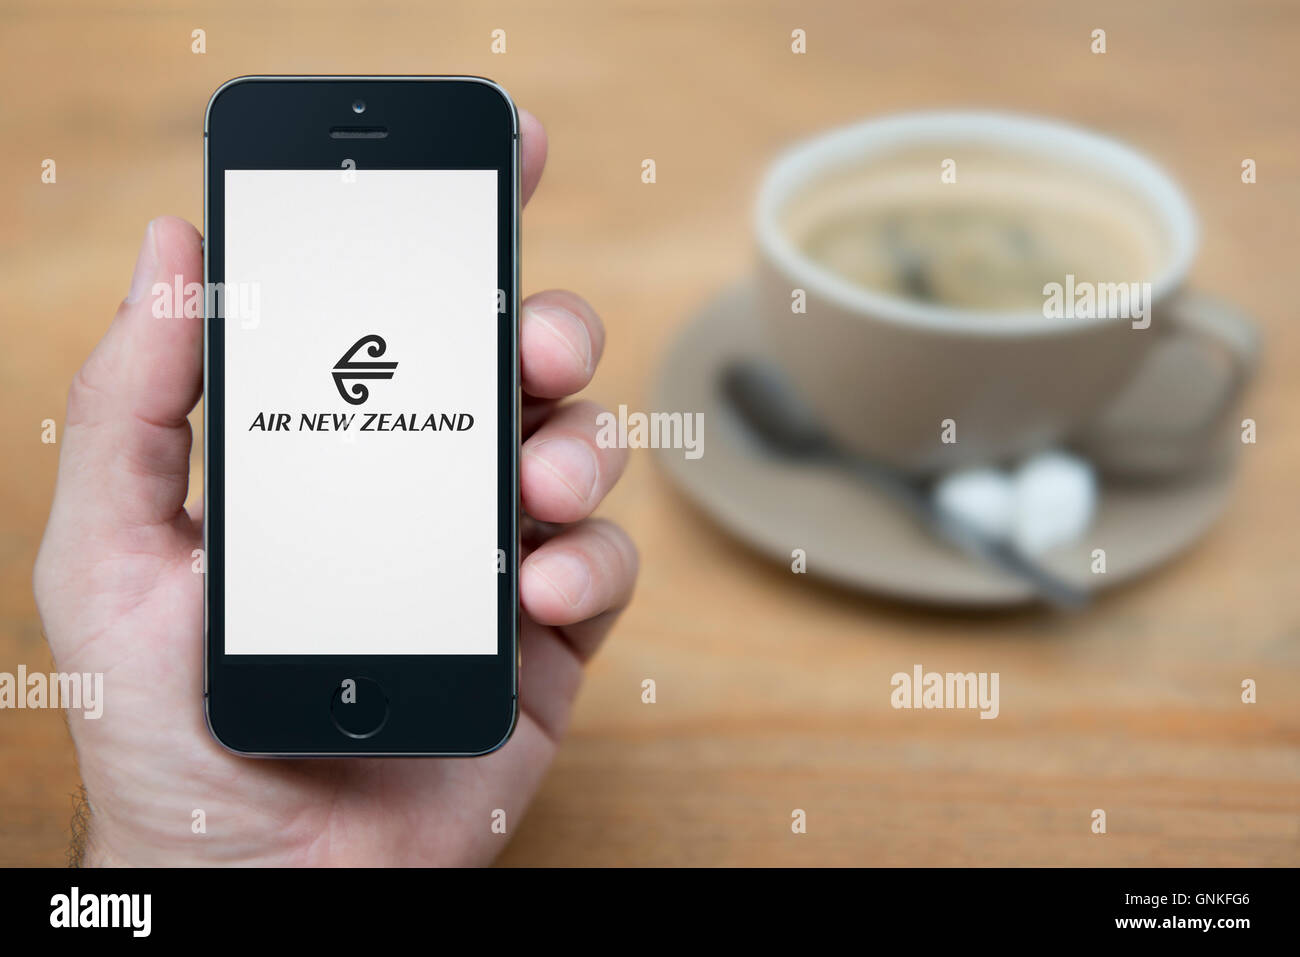 A man looks at his iPhone which displays the Air New Zealand logo, while sat with a cup of coffee (Editorial use only). Stock Photo